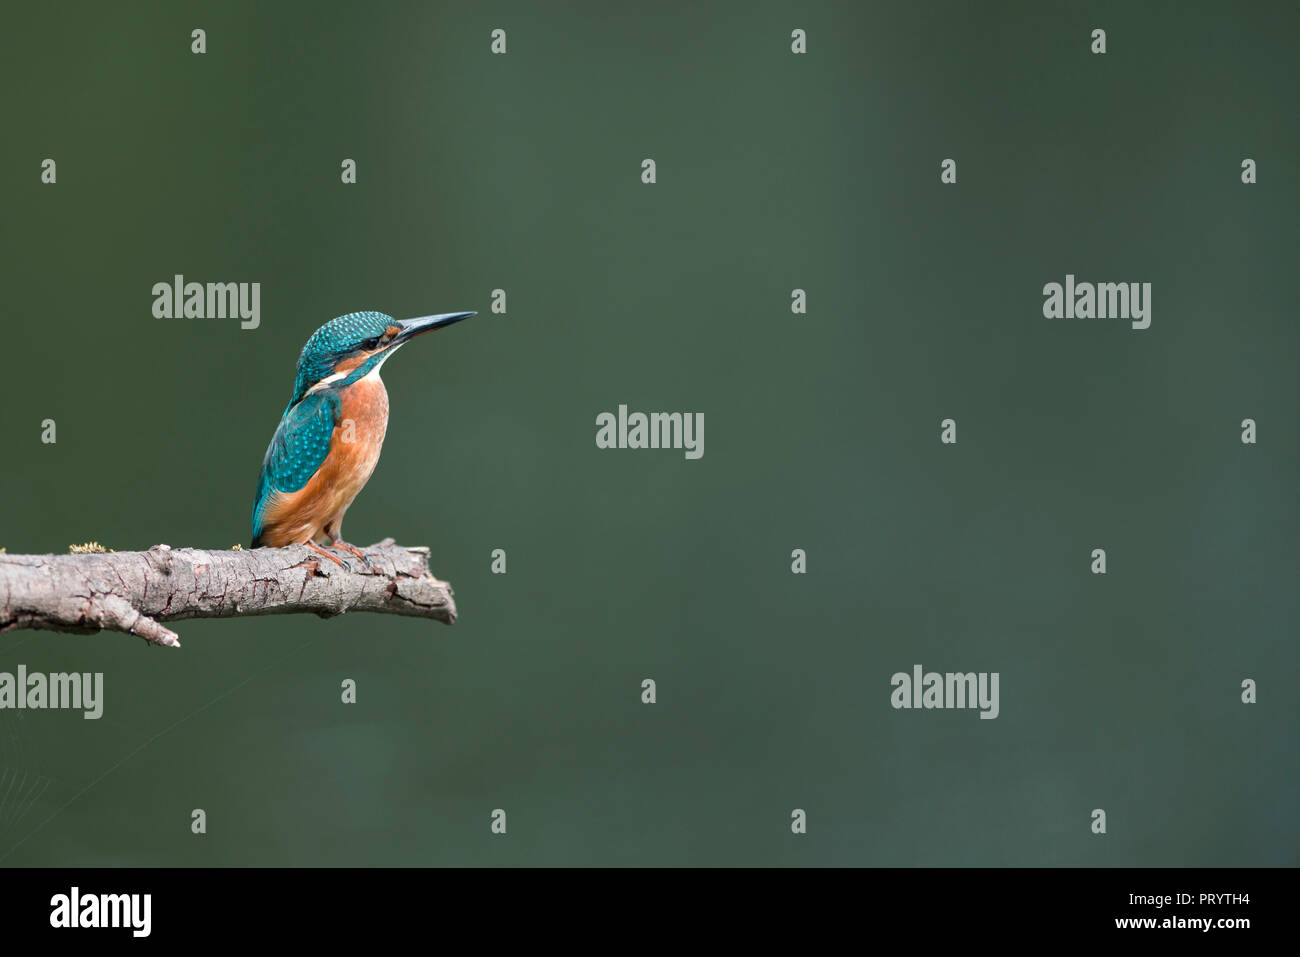 Kingfisher perching on branch Banque D'Images